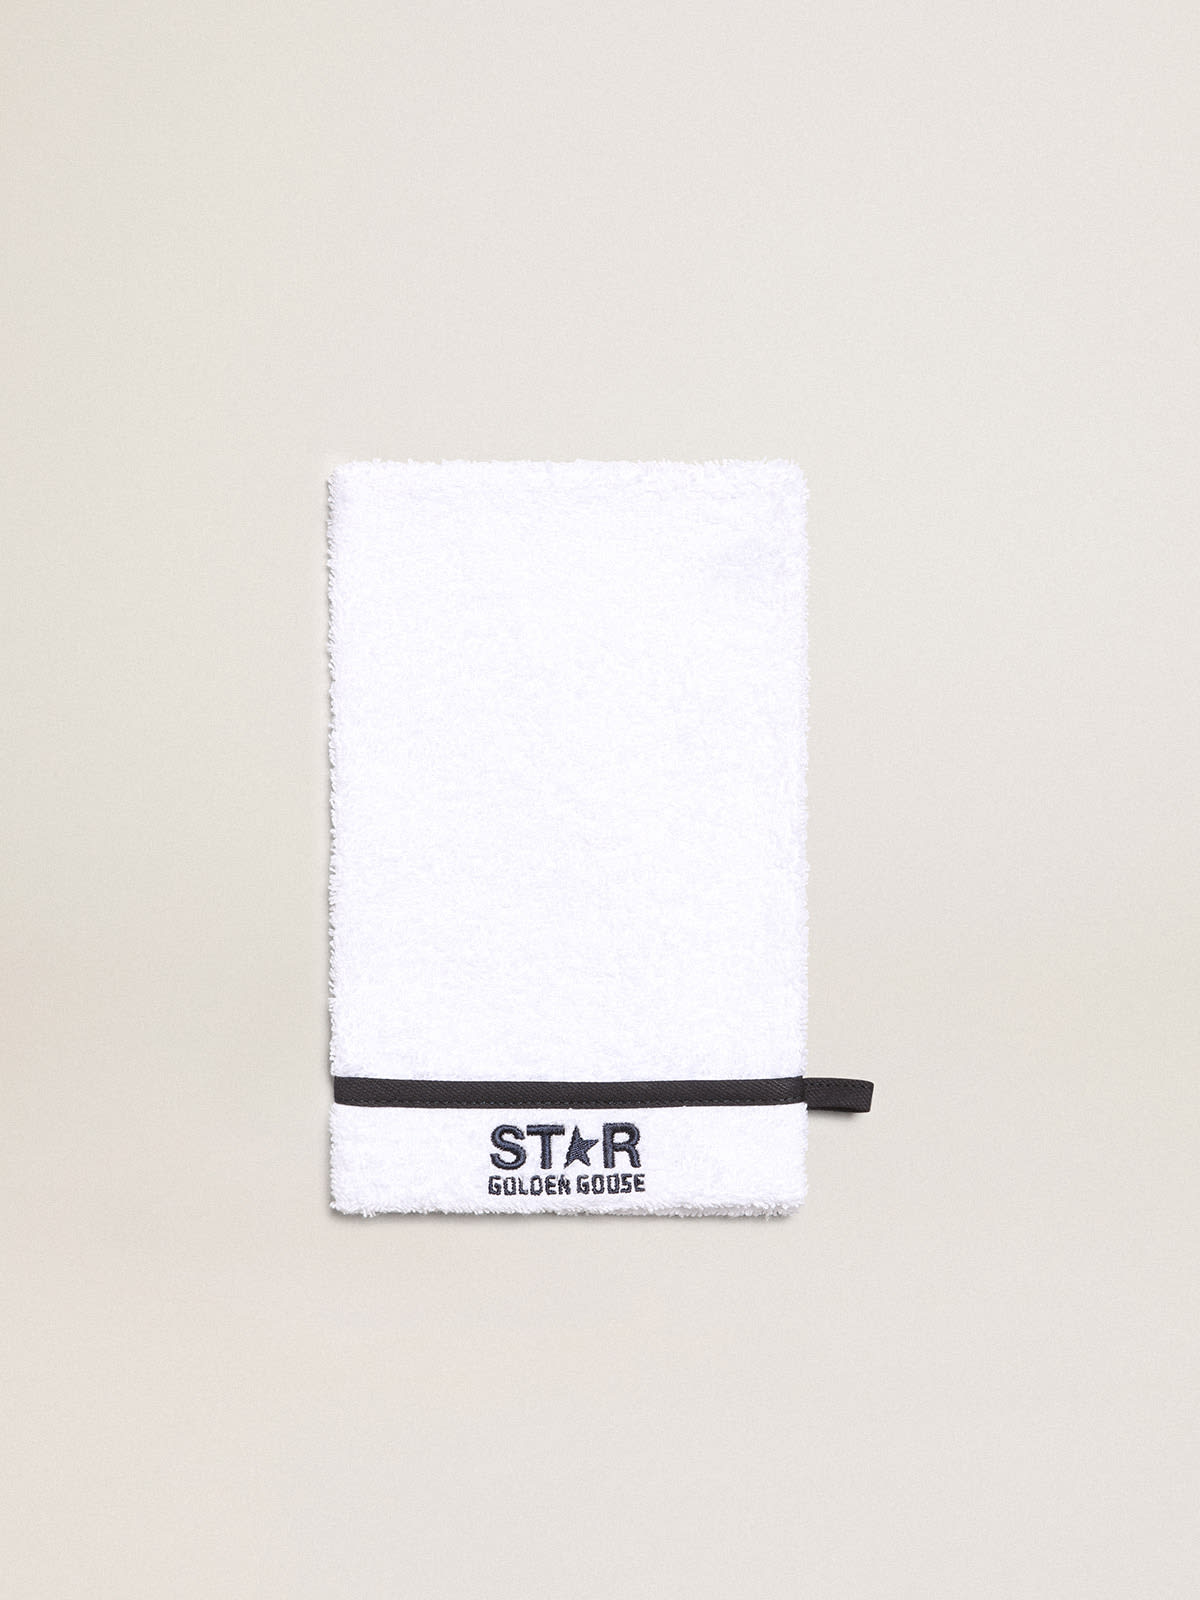 Golden Goose - Star Collection bath set gift box in white and milk white with contrasting navy blue edging and logo in 